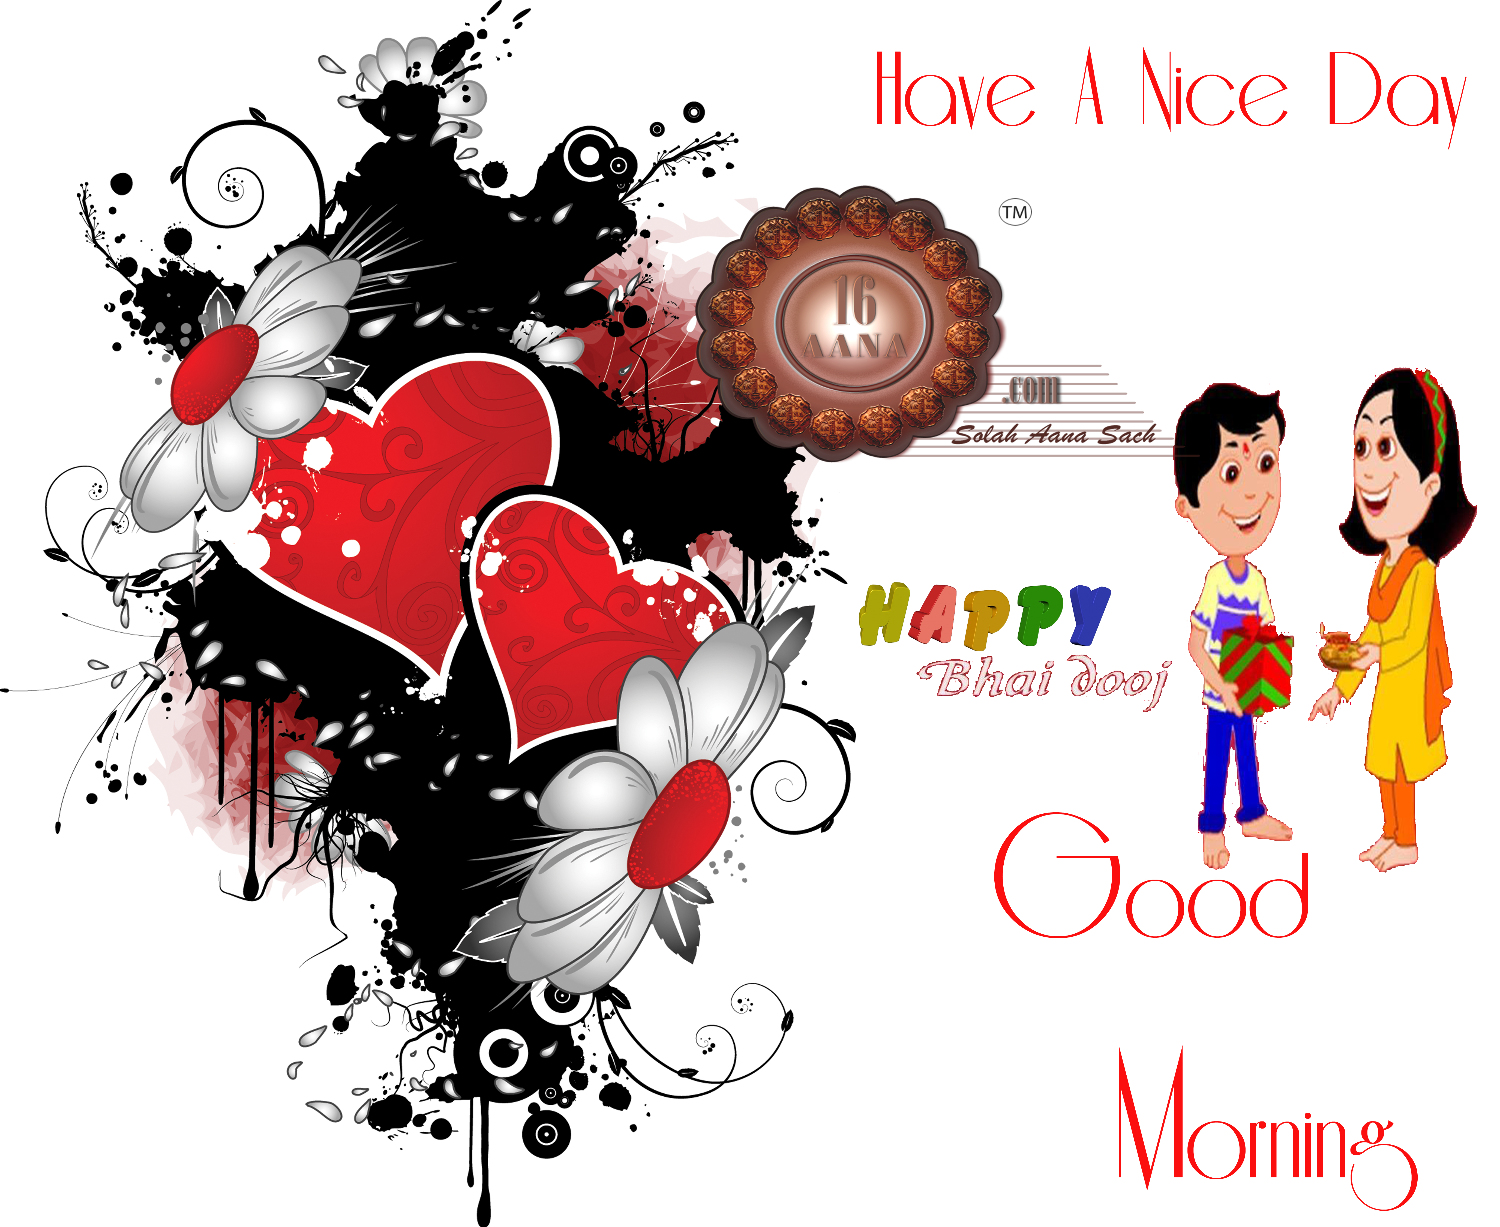 Have A Nice Day Good Morning Sms Wallpaper Download - HD Wallpaper 